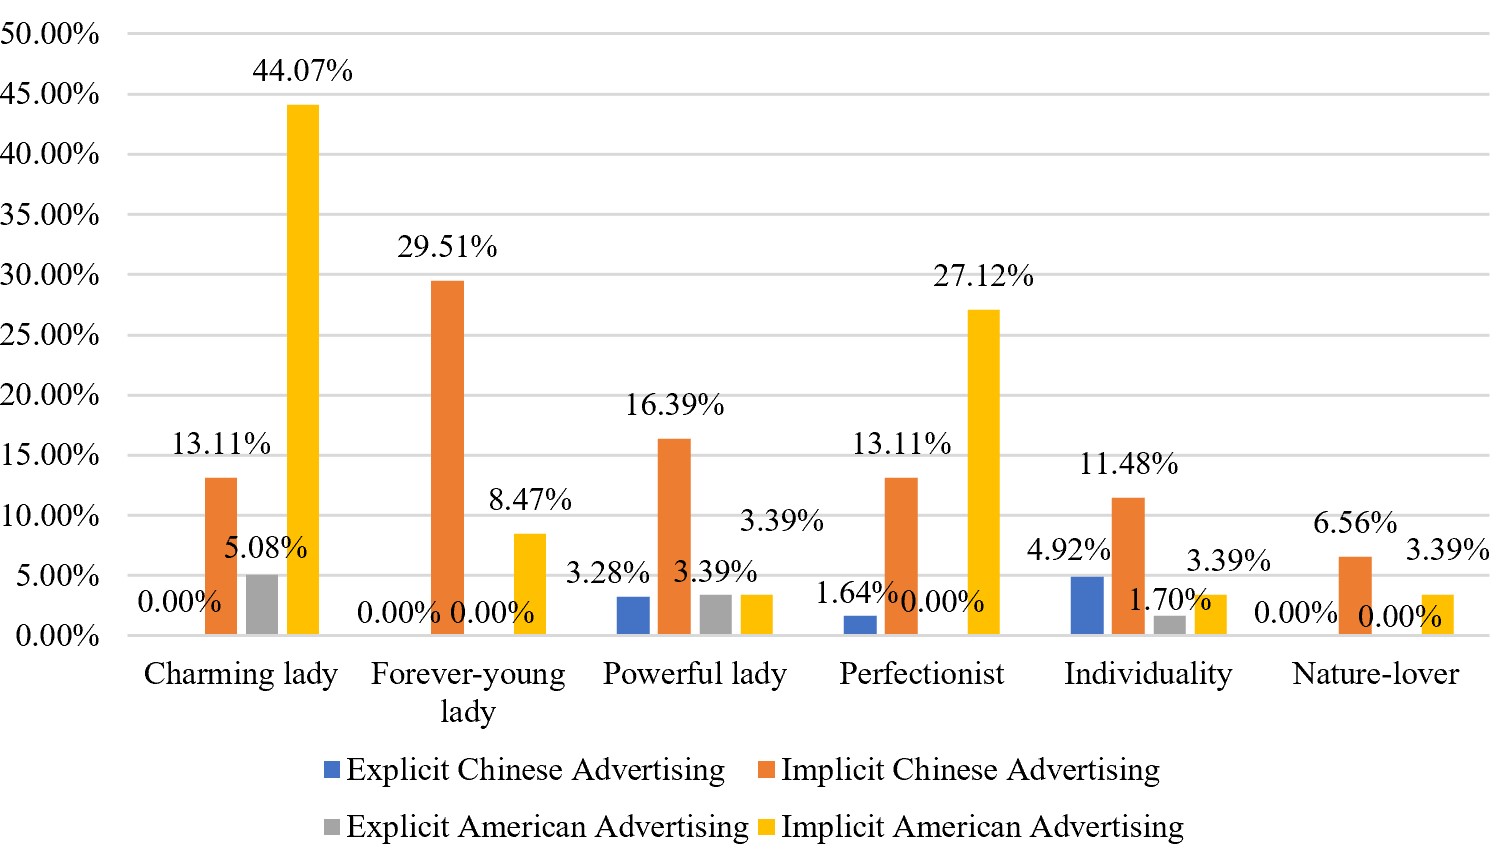 Percentage (%) of explicit and implicit advertising in China and America